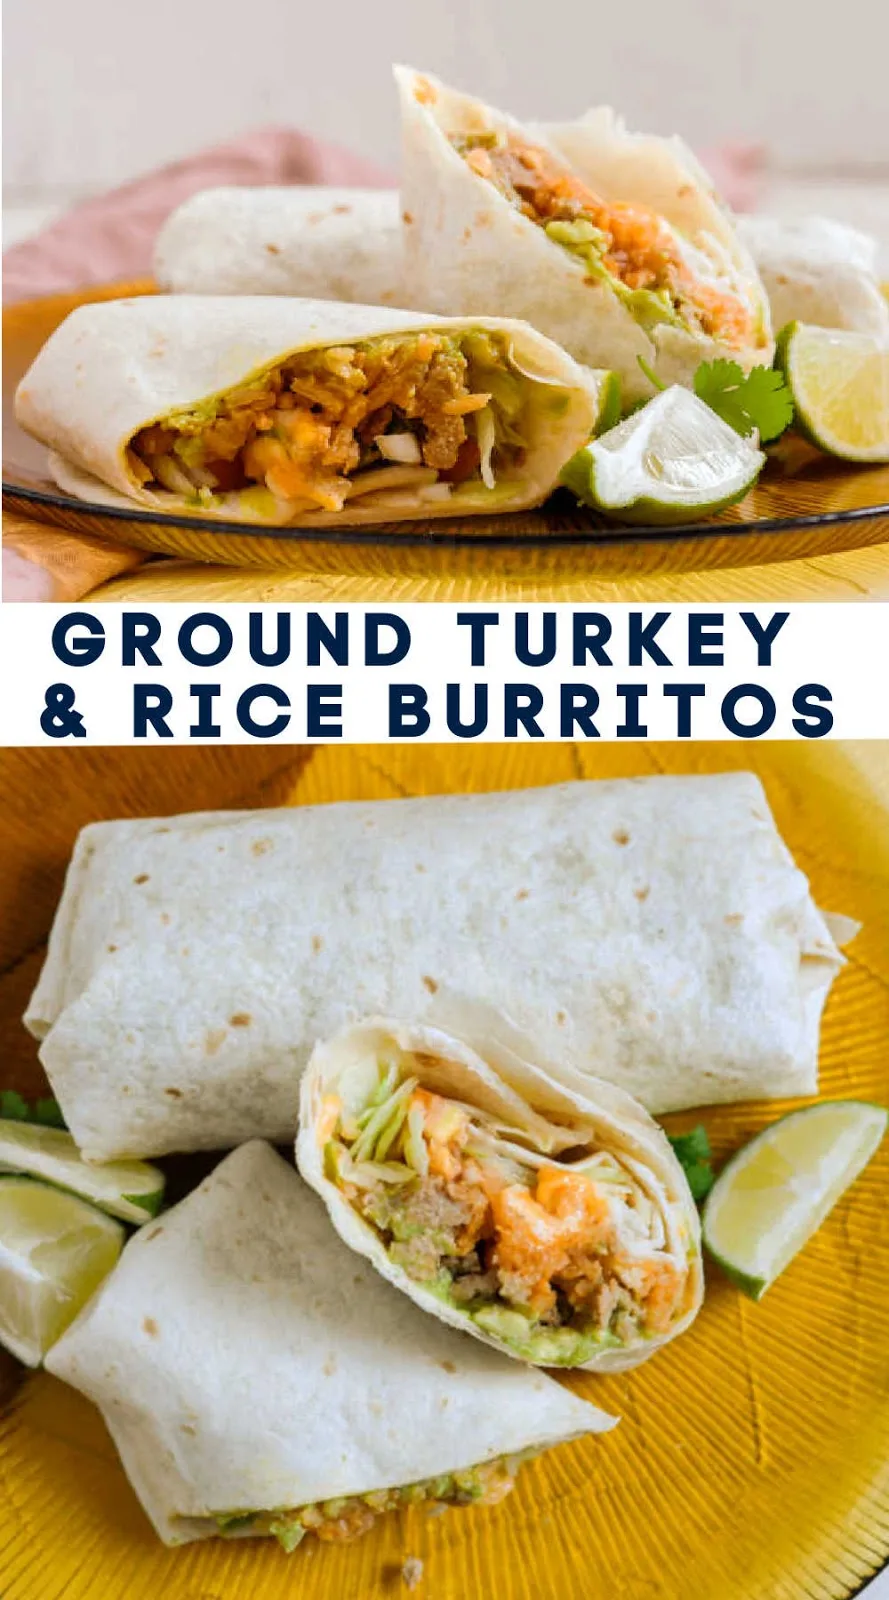 These great burritos have layer after layer of flavor. They are a great hearty dinner filled with so much homemade goodness.